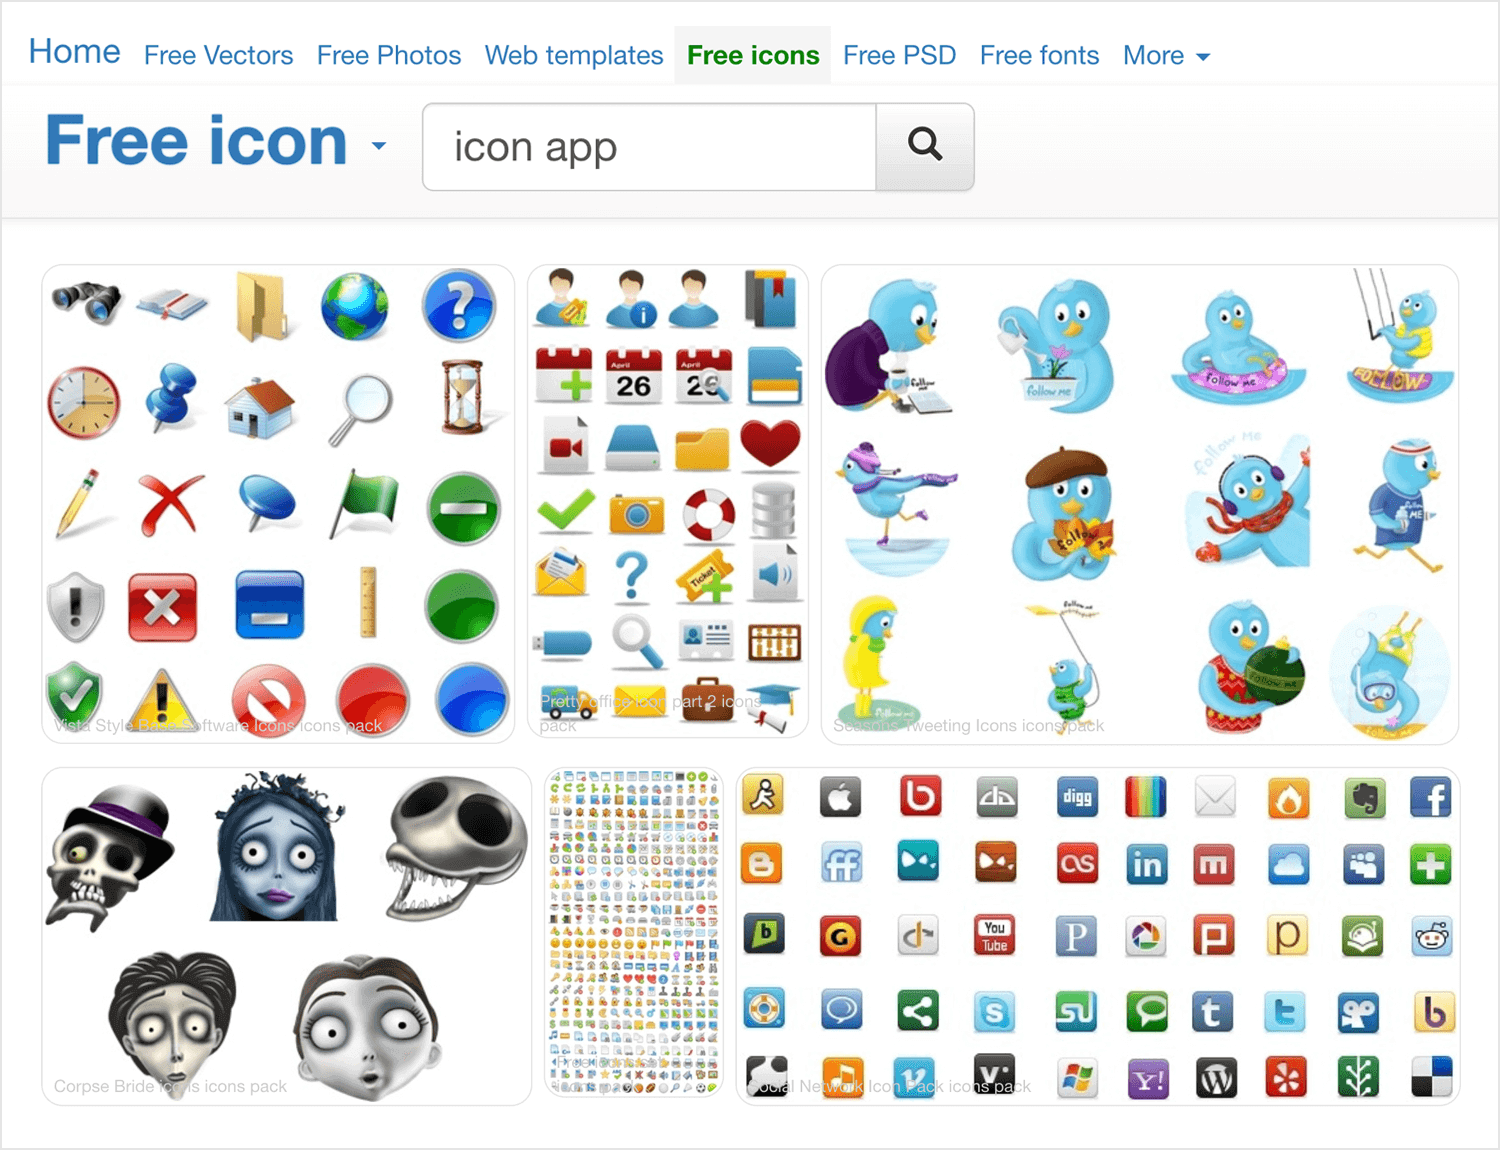 all free download as place to find icons for apps